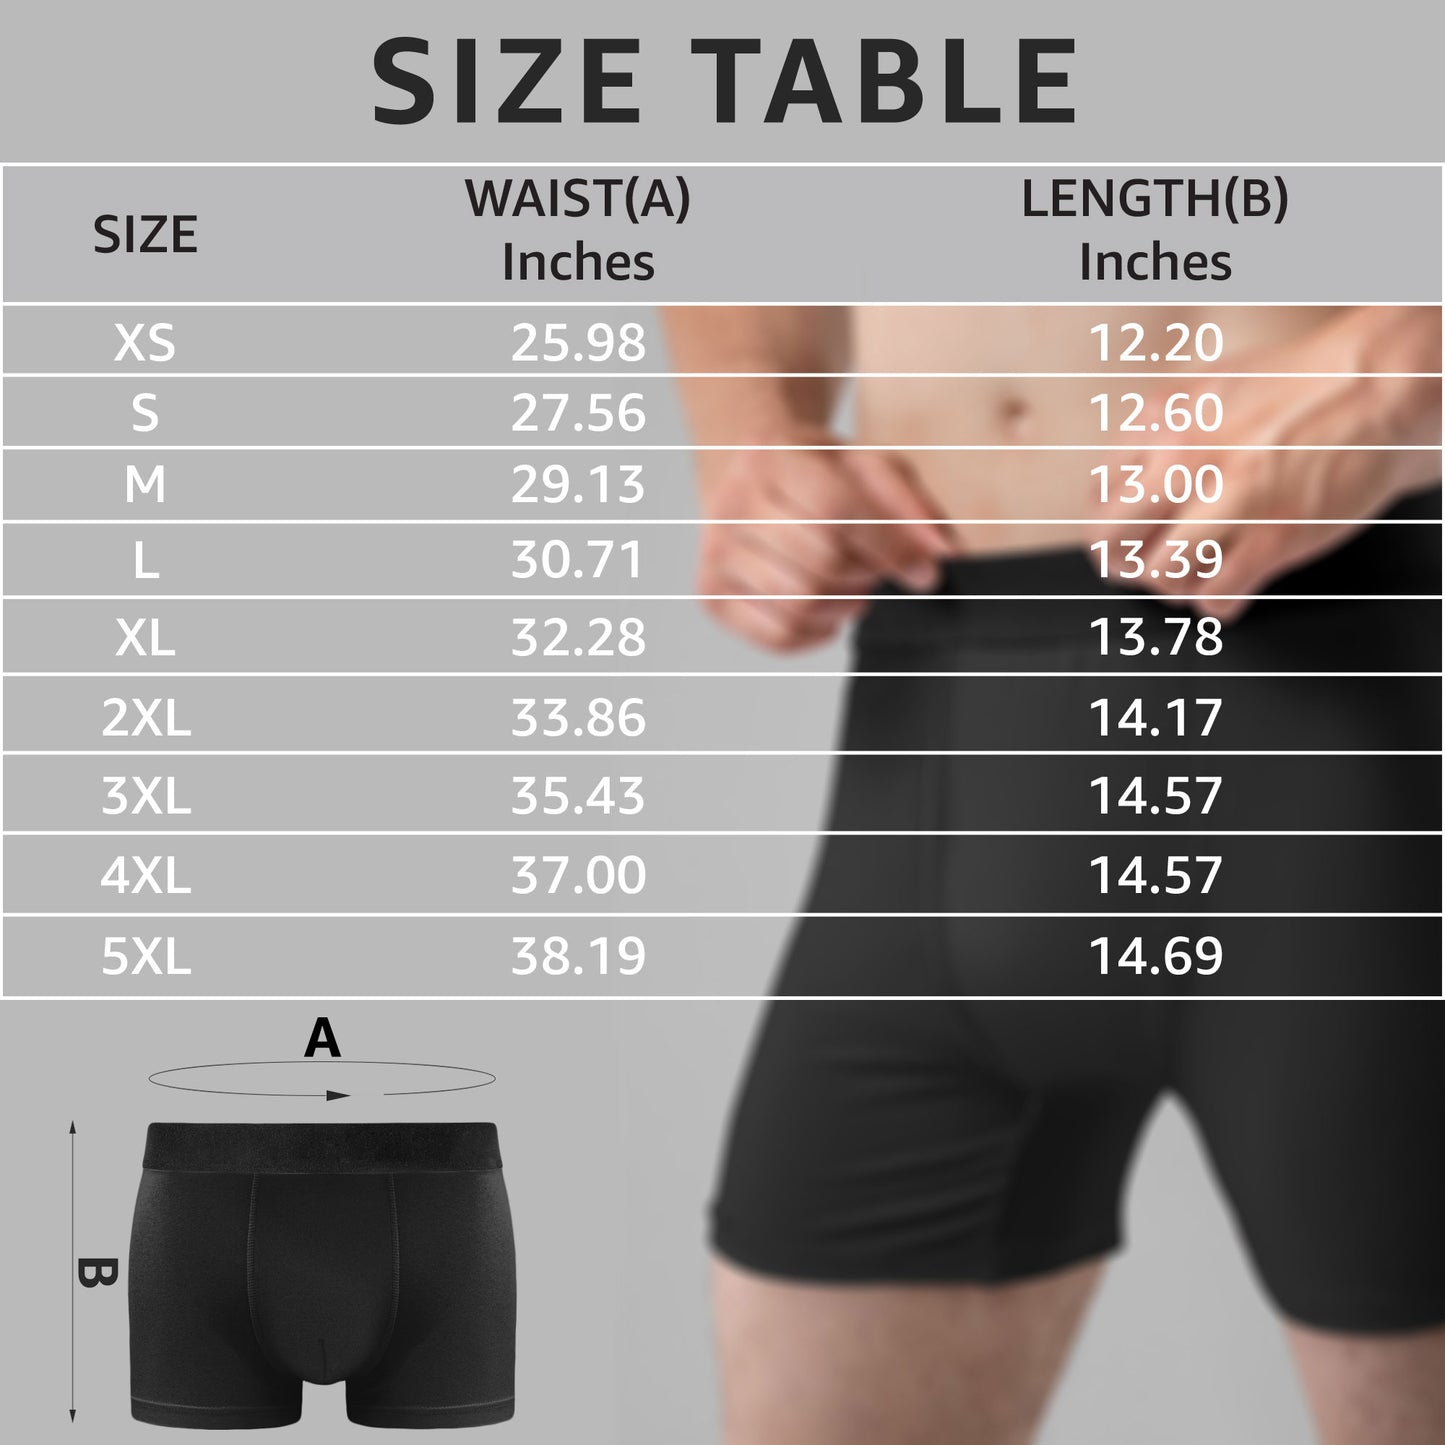 Choking Hazard (Property Of Wife) - Personalized Photo Men's Boxer Briefs